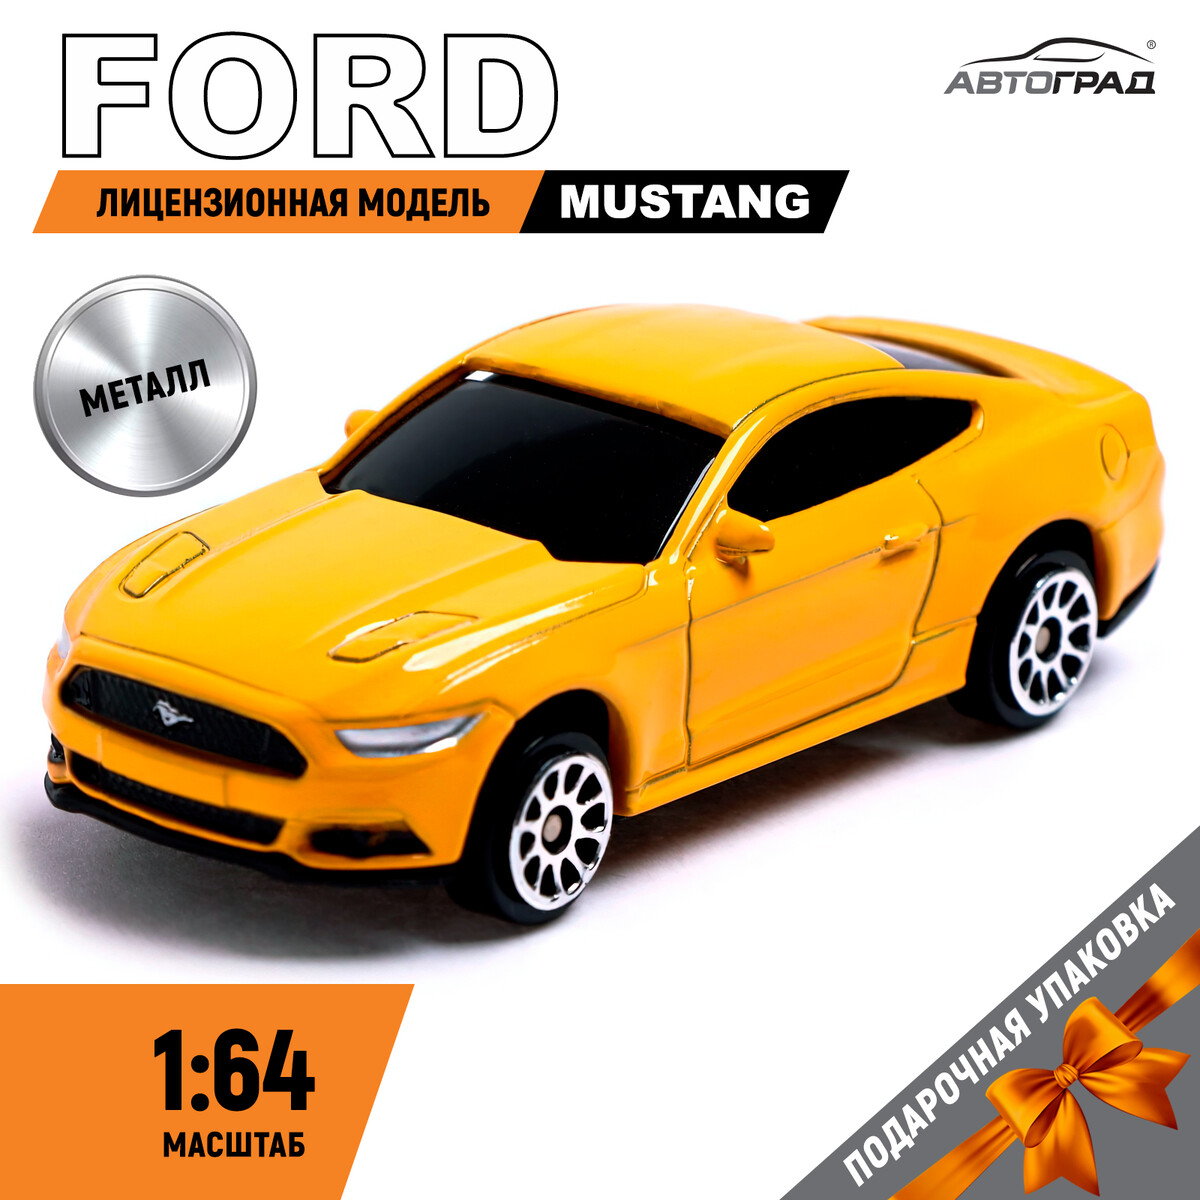 Машина металлическая ford mustang, 1:64, цвет желтый he xiang remote control car key shell case for ford ford range edge explorer fusion mustang lincoln mkc mkx mkz replacement card